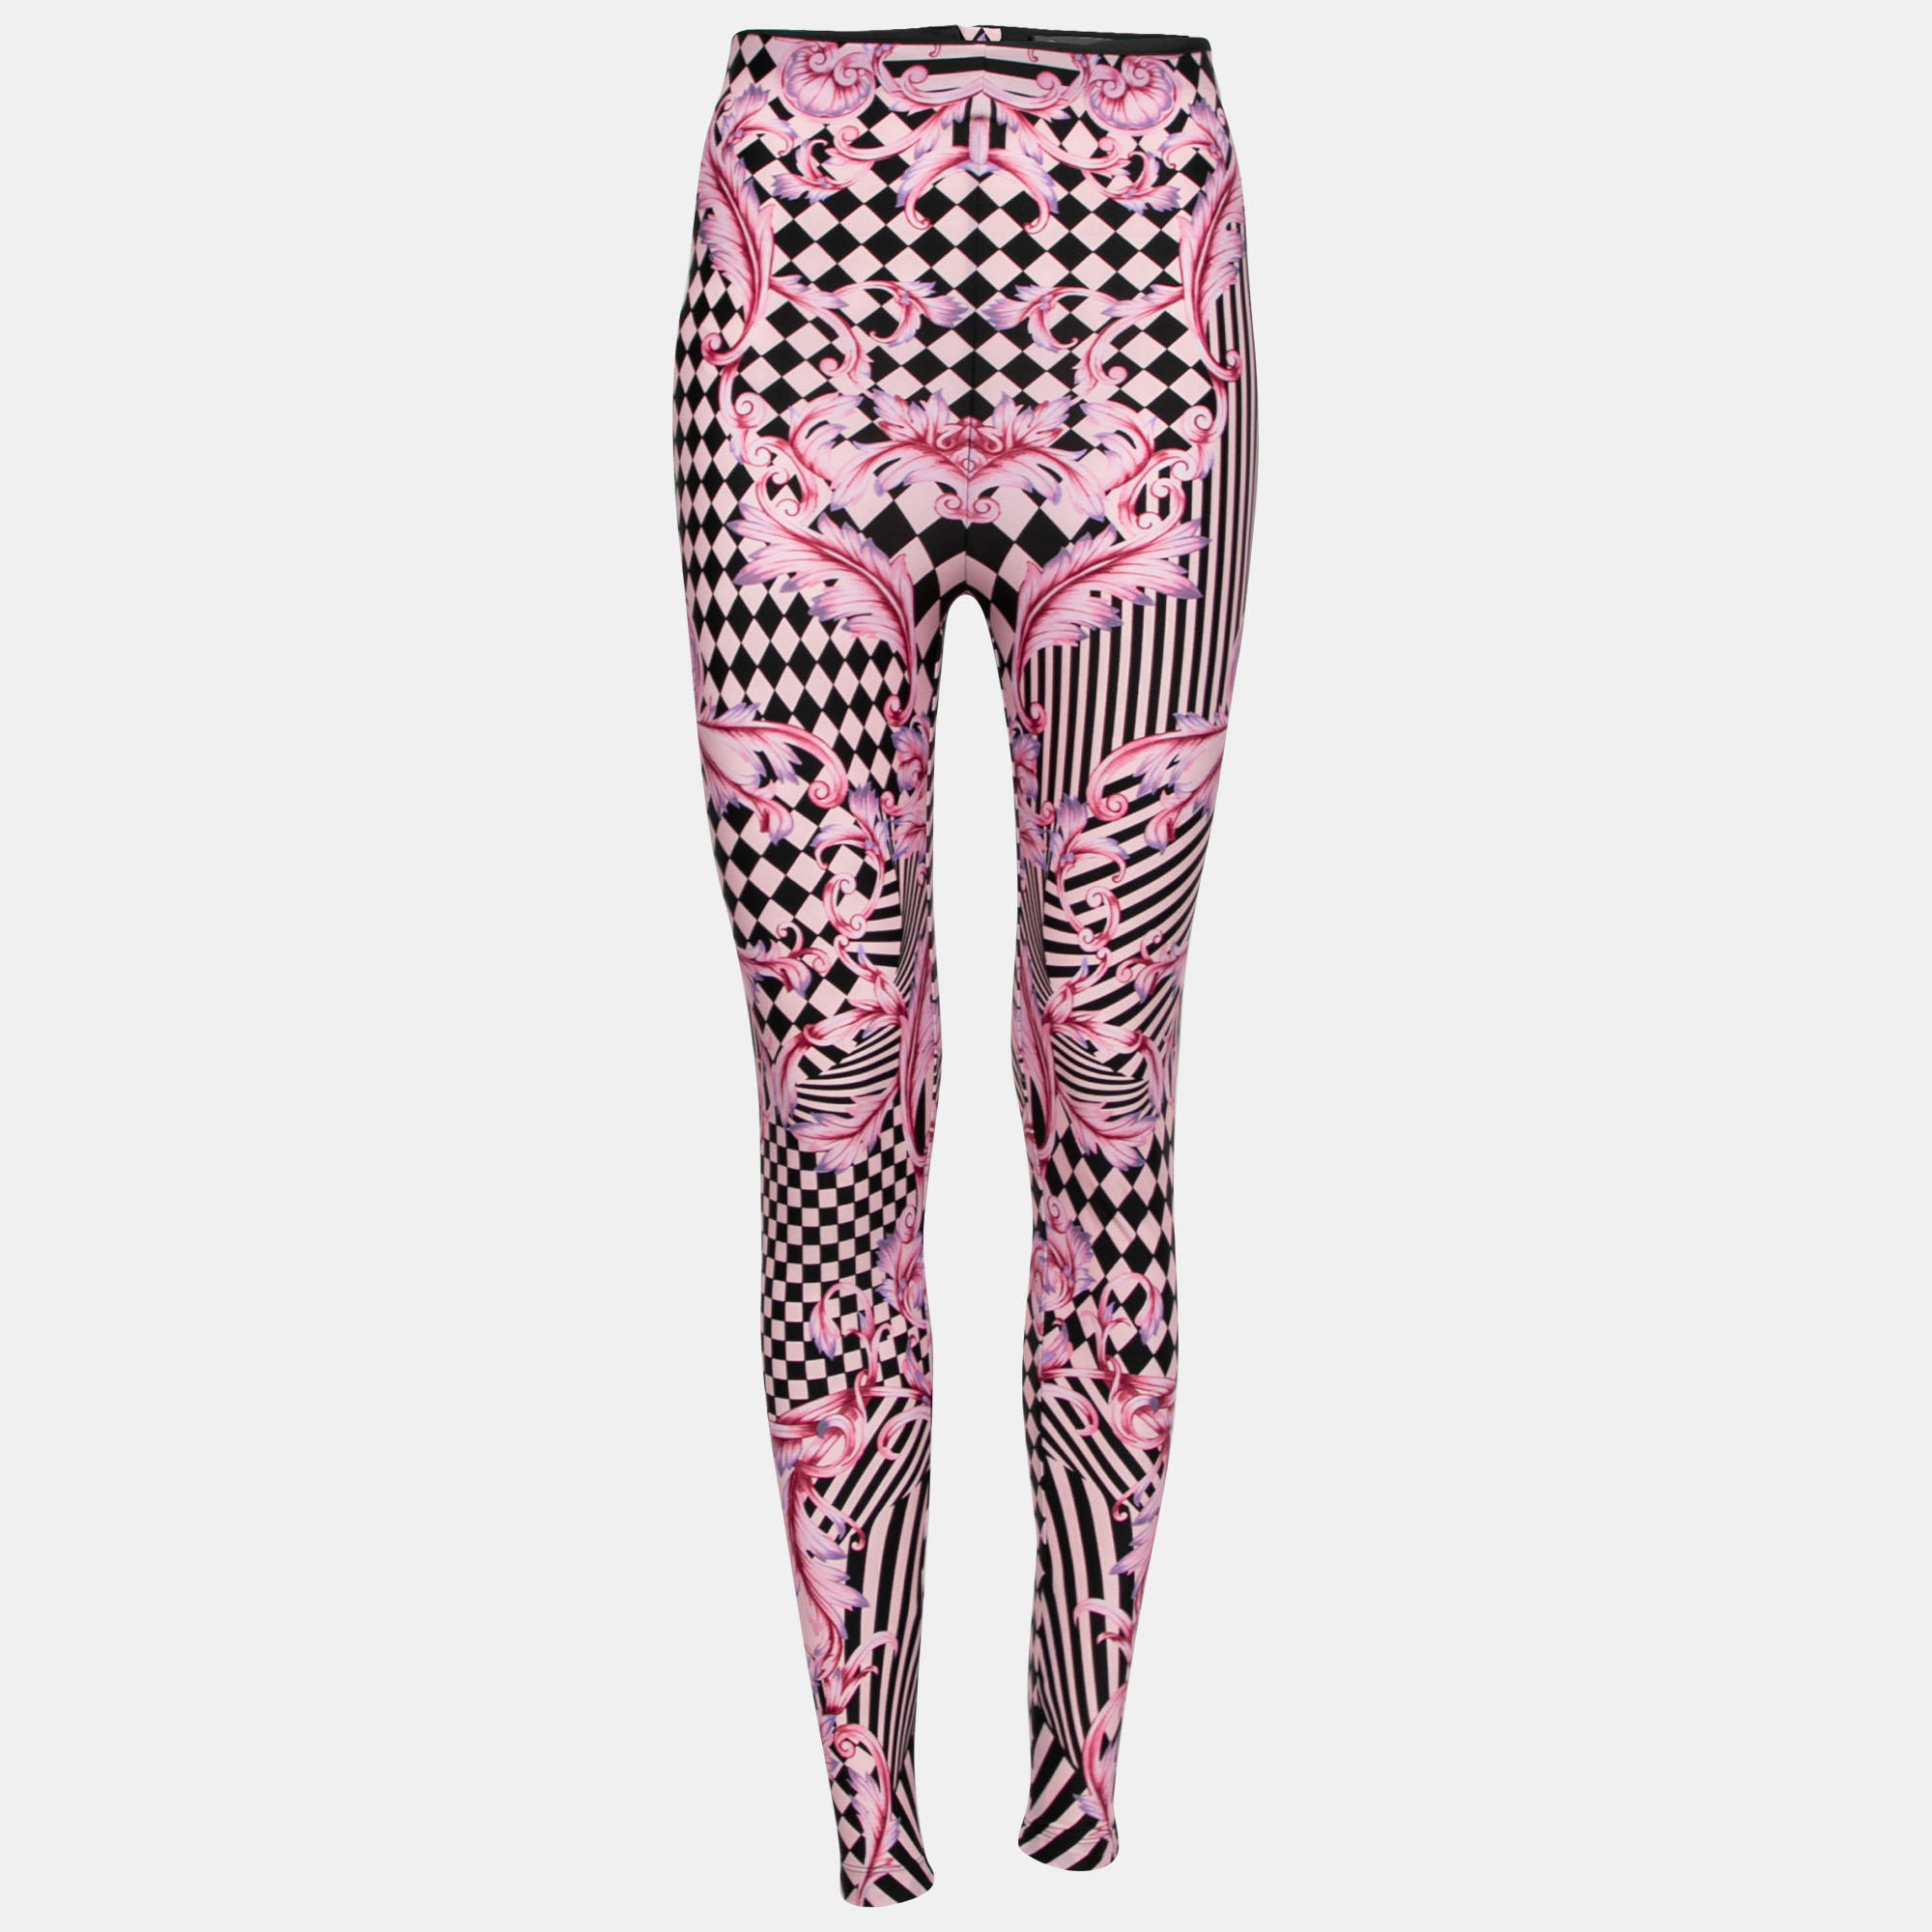 Versace pink stretch knit striped & baroque print leggings s